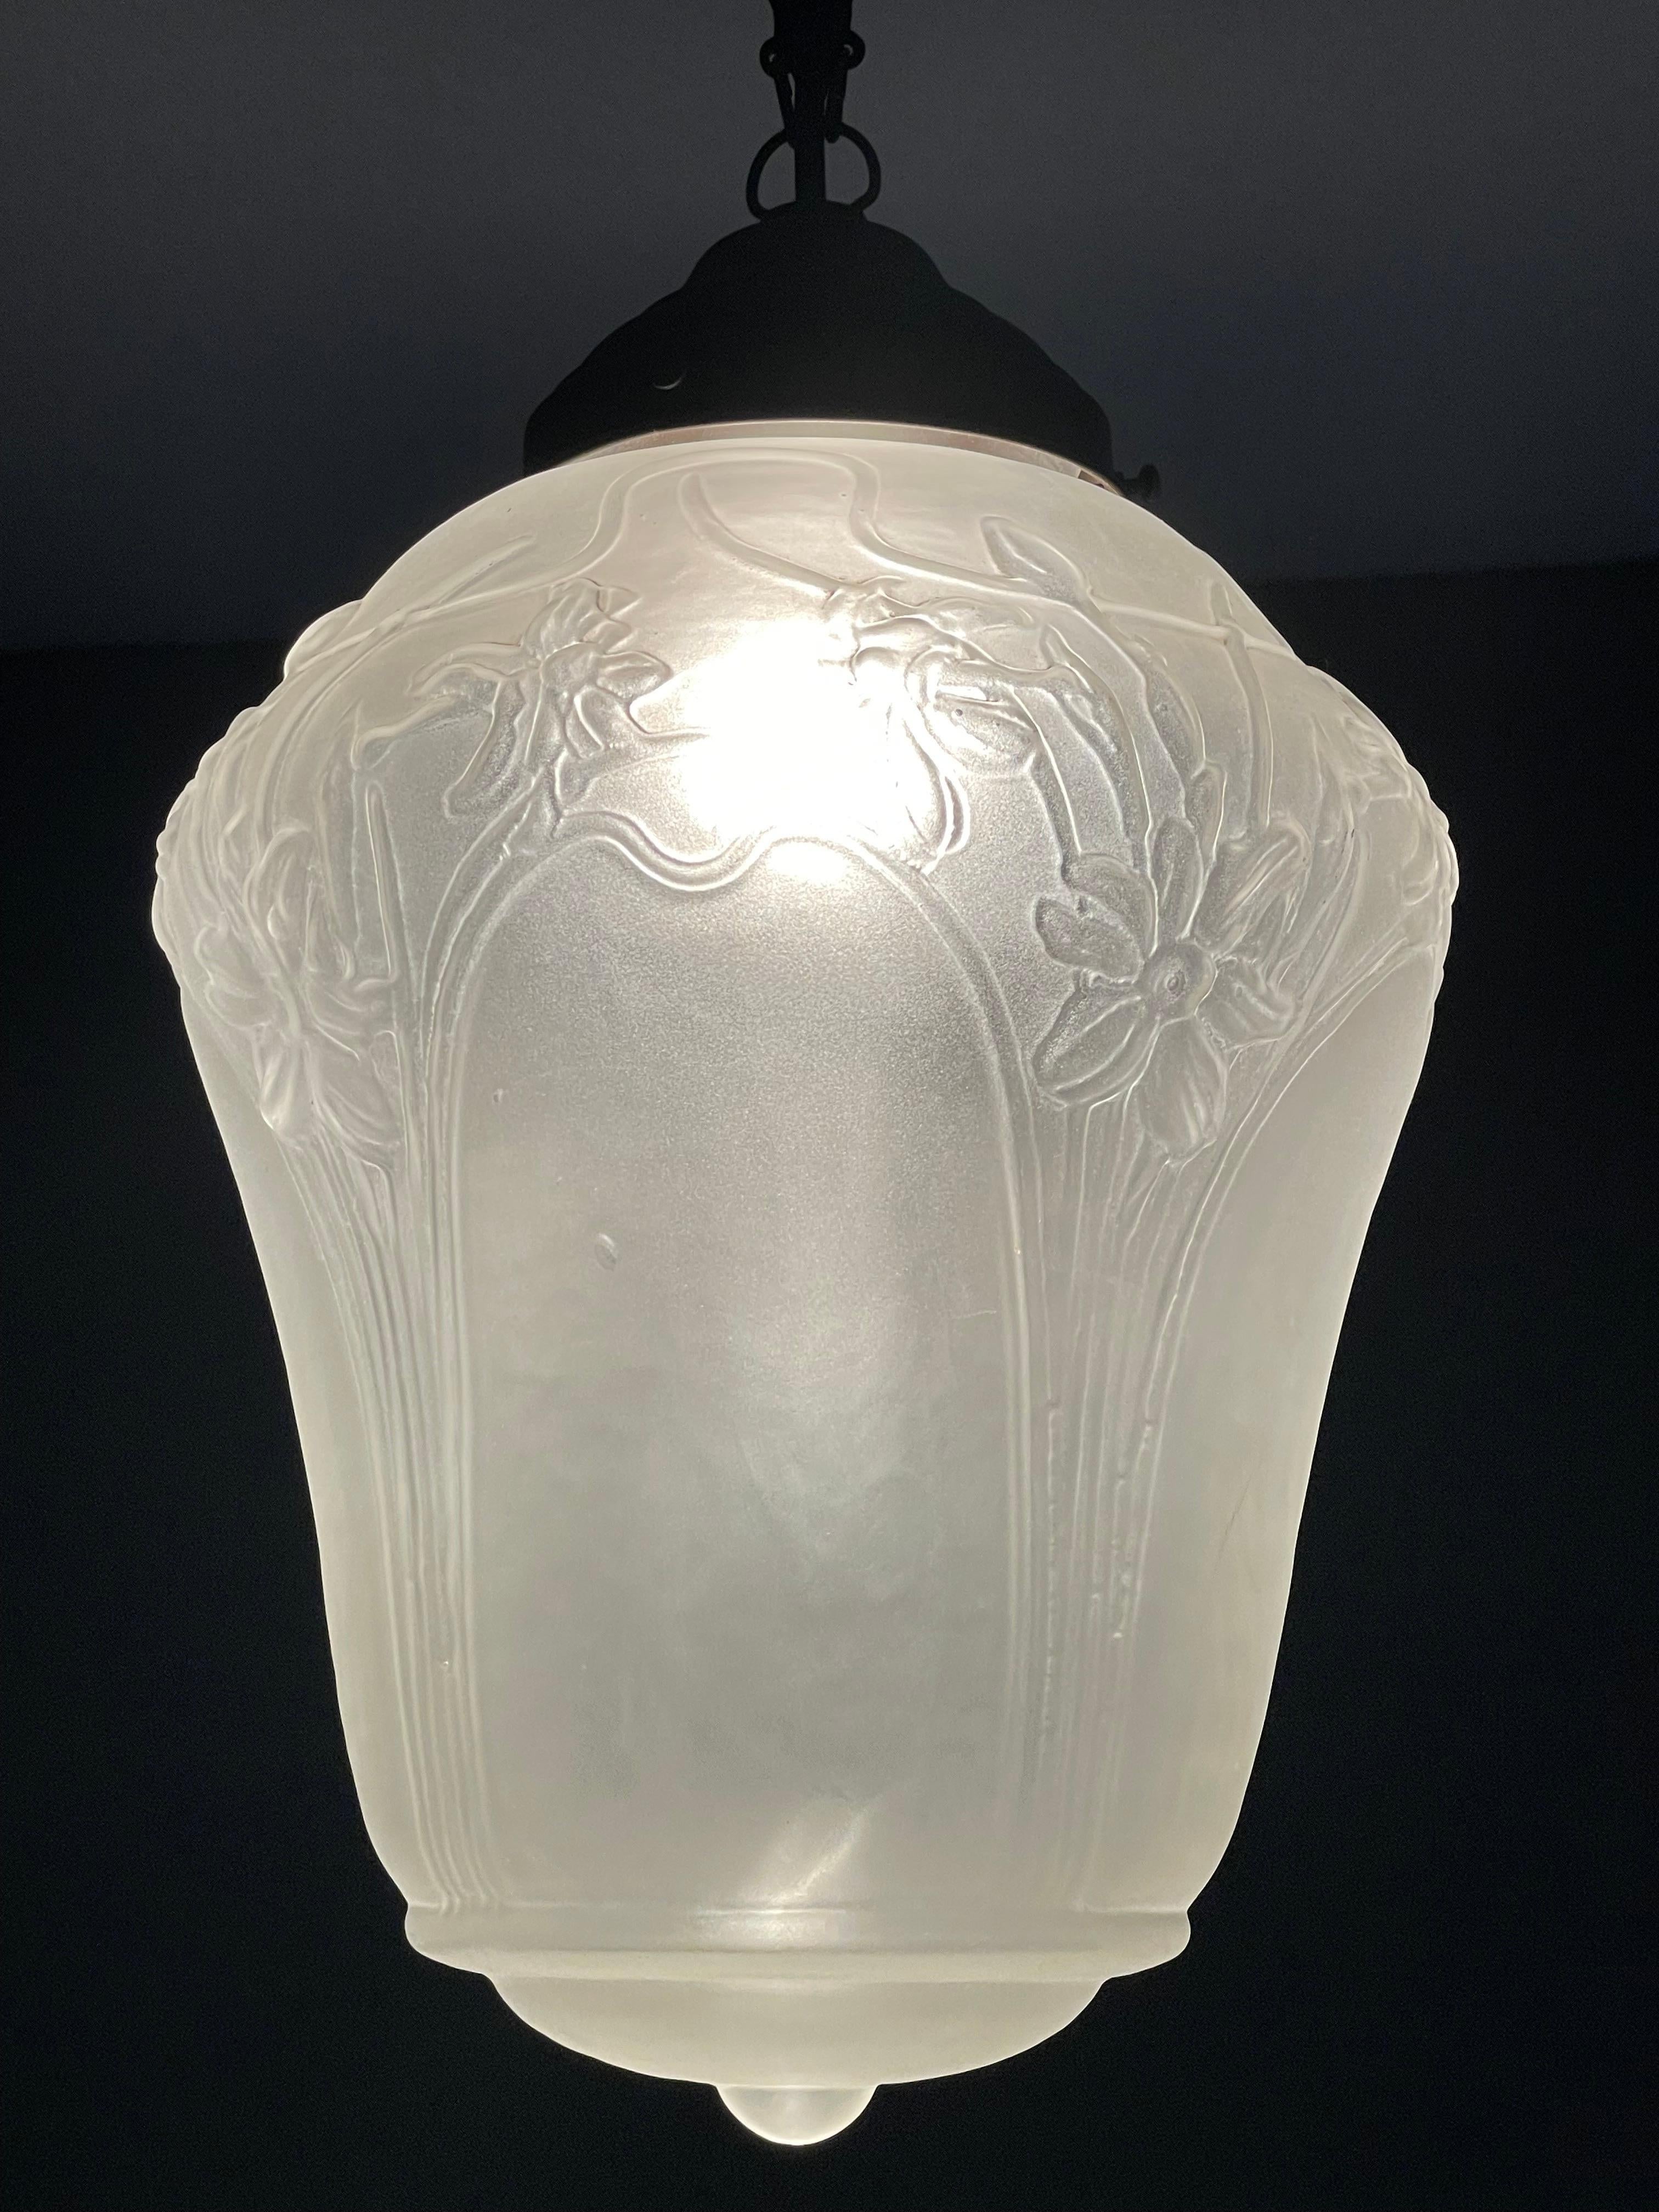 Original Arts and Crafts Glass Hallway Pendant Light with Daffodil Flowers 1900s For Sale 10